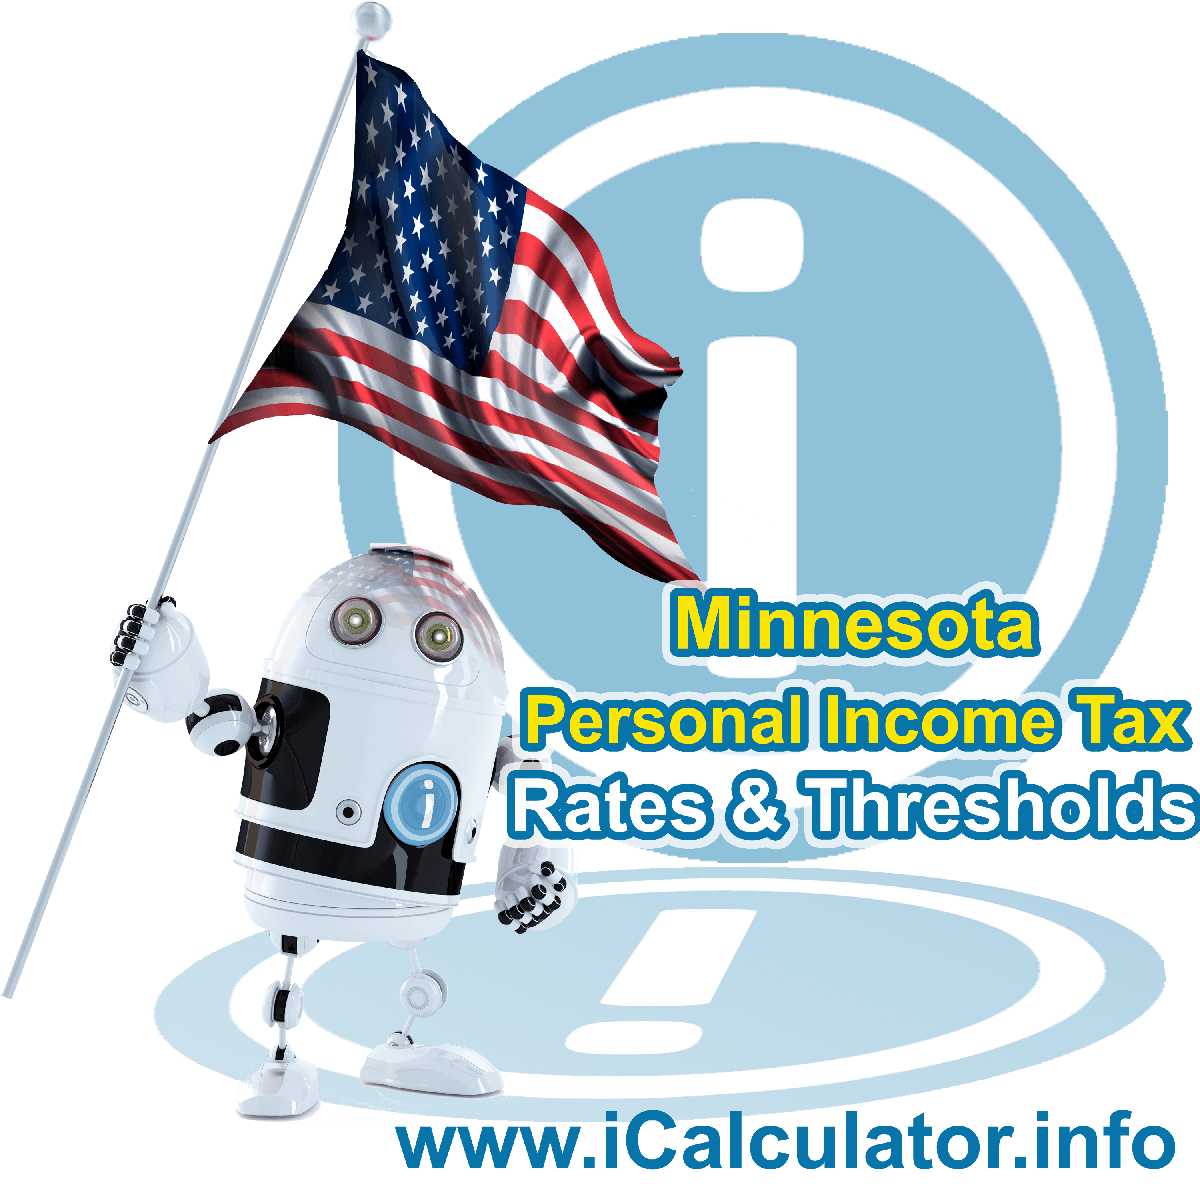 Minnesota State Tax Tables 2019. This image displays details of the Minnesota State Tax Tables for the 2019 tax return year which is provided in support of the 2019 US Tax Calculator